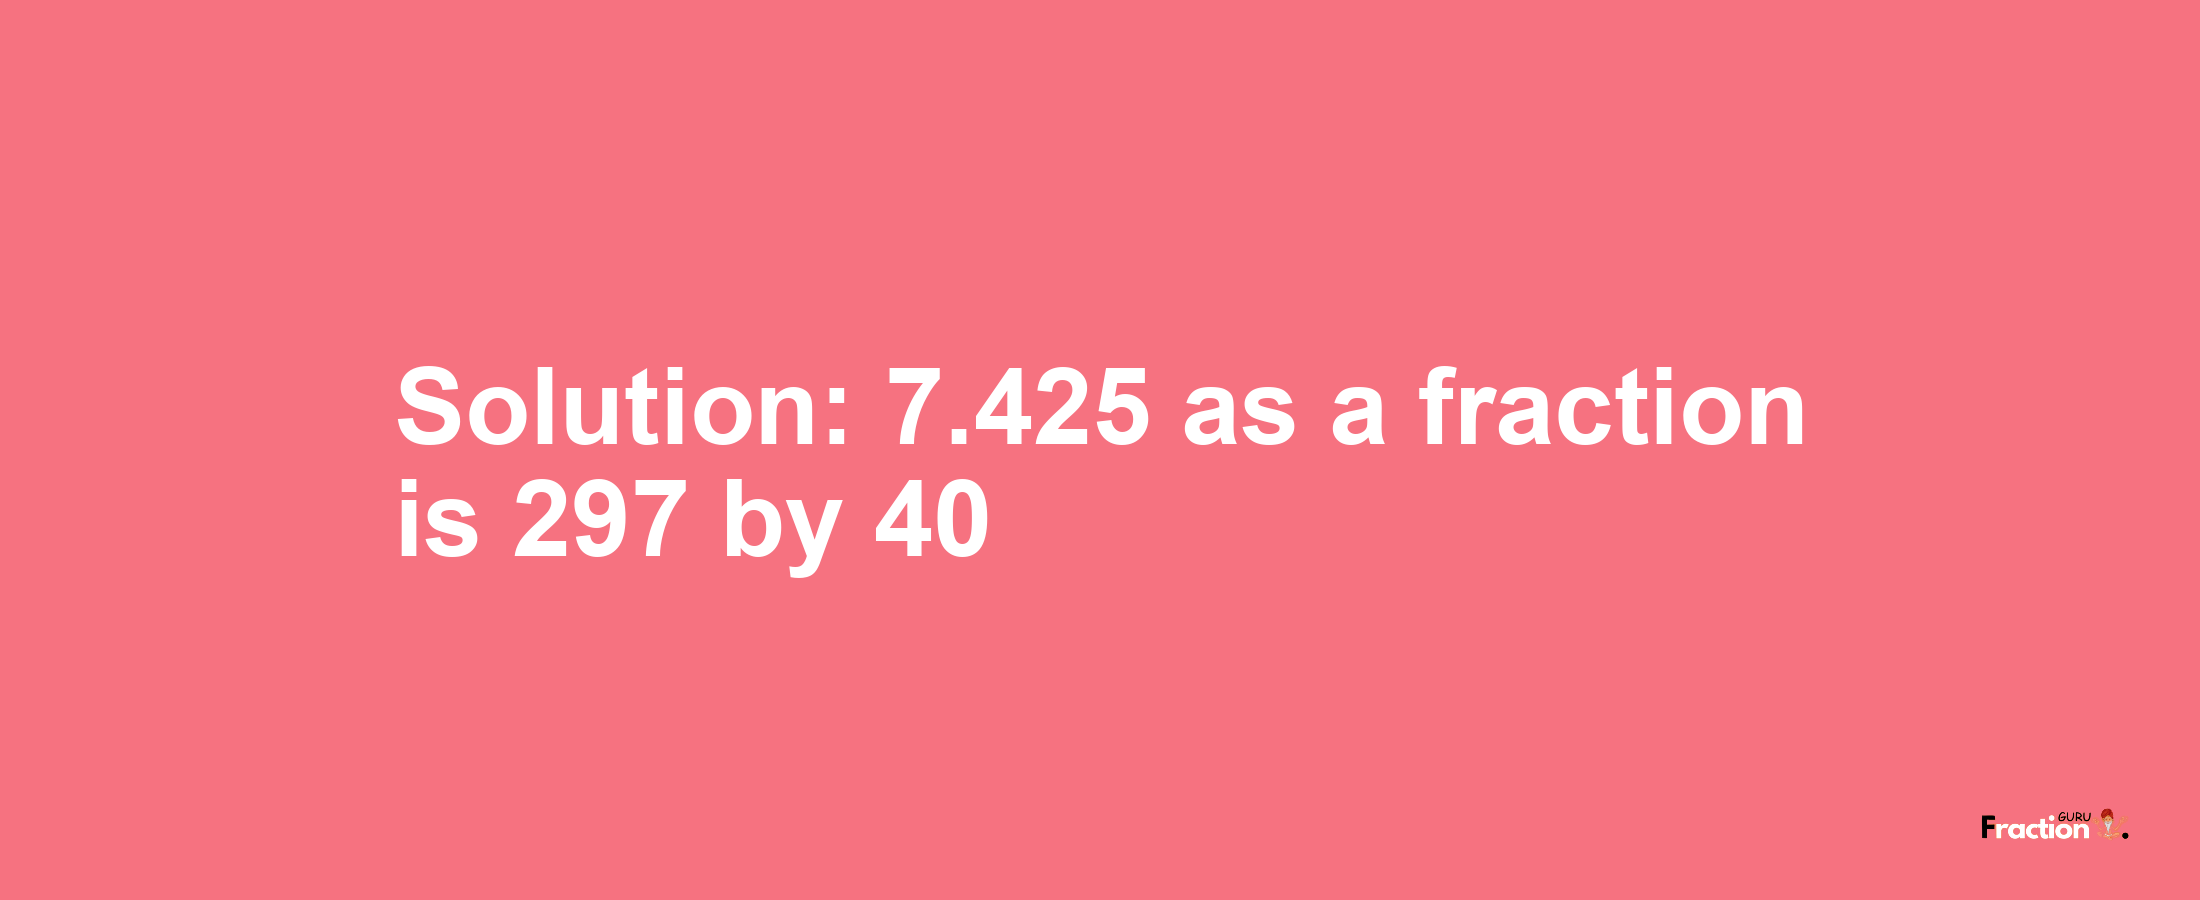 Solution:7.425 as a fraction is 297/40